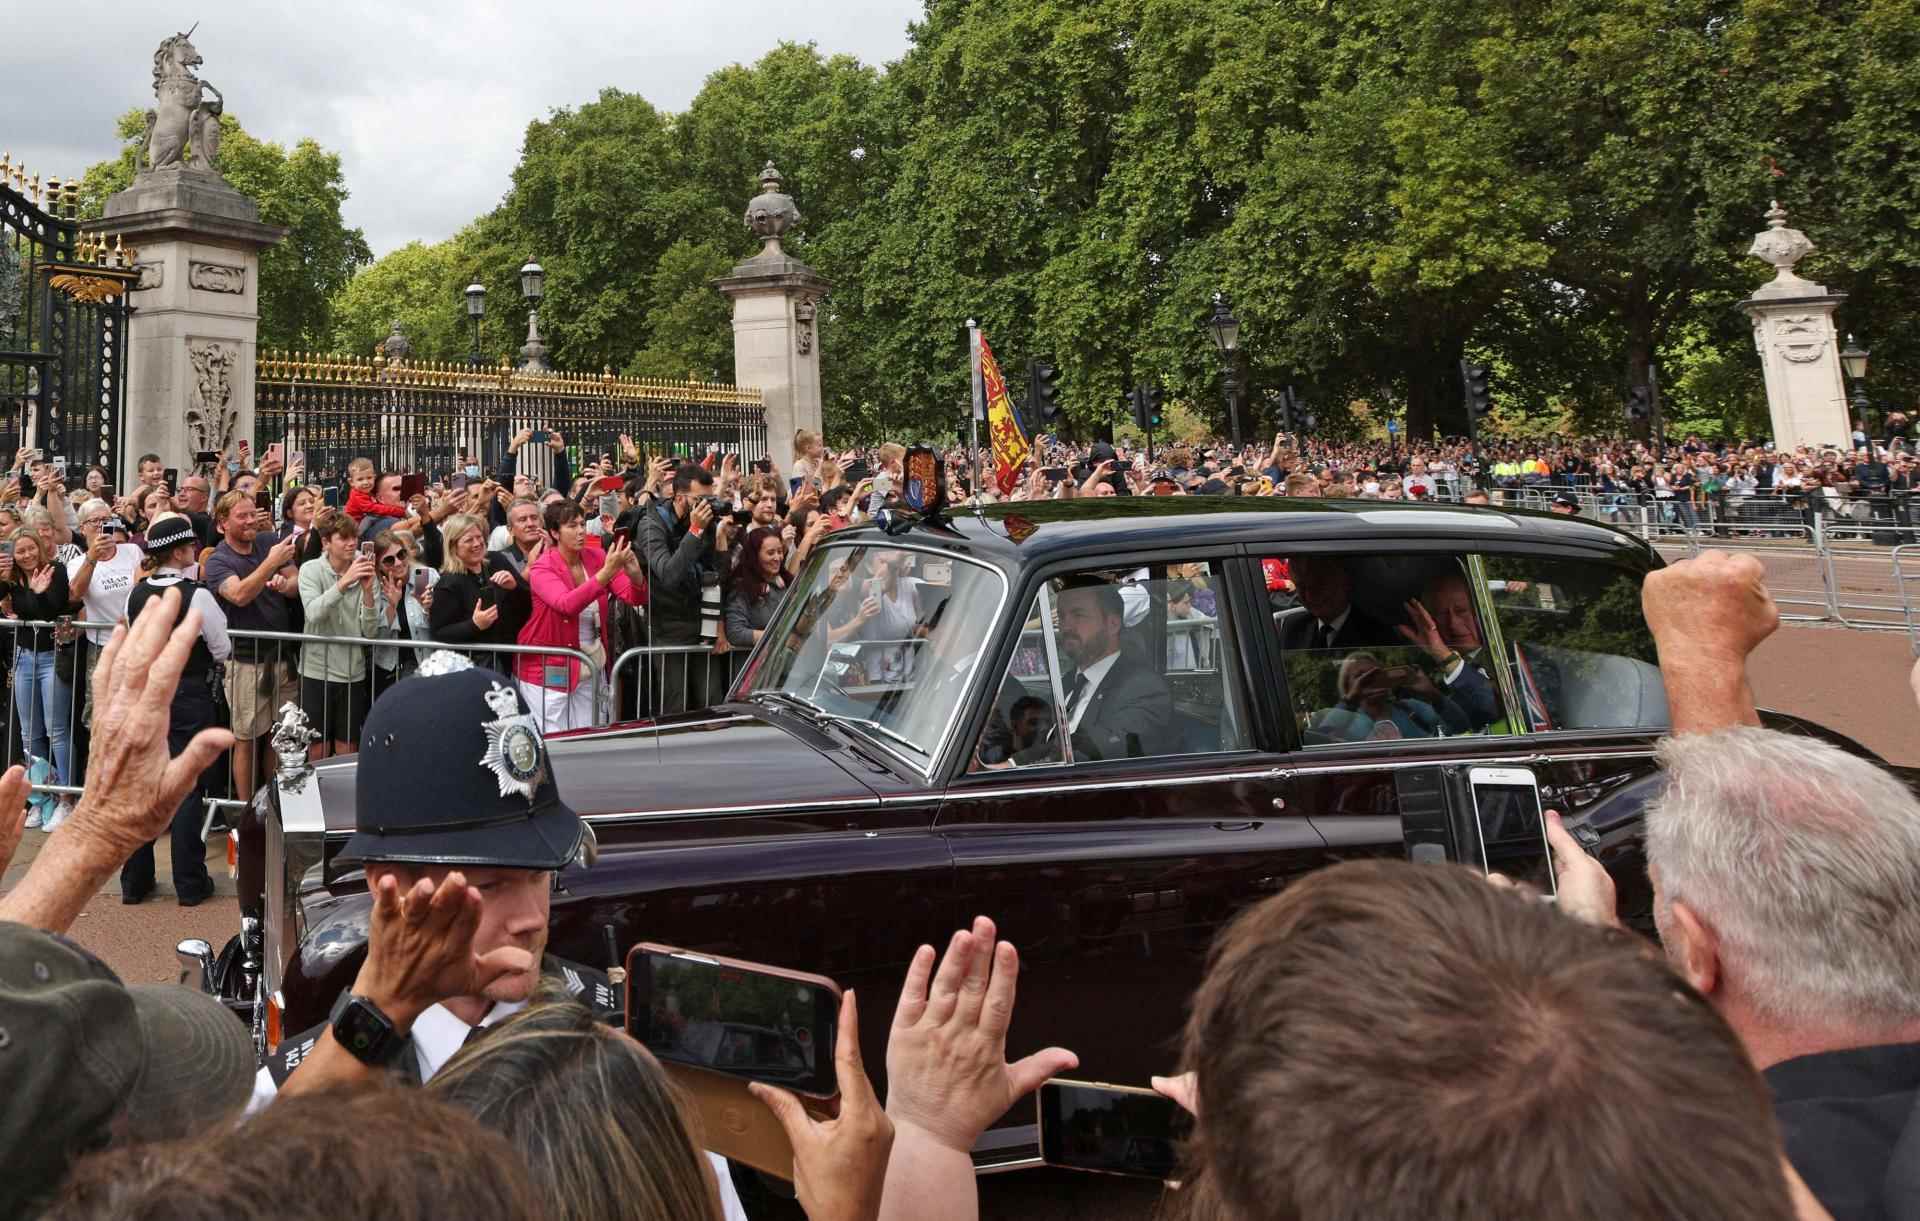   Charles III cheered by the crowd on his return to Buckingham Palace after the Council of Accession ceremony, in London, September 10, 2022.